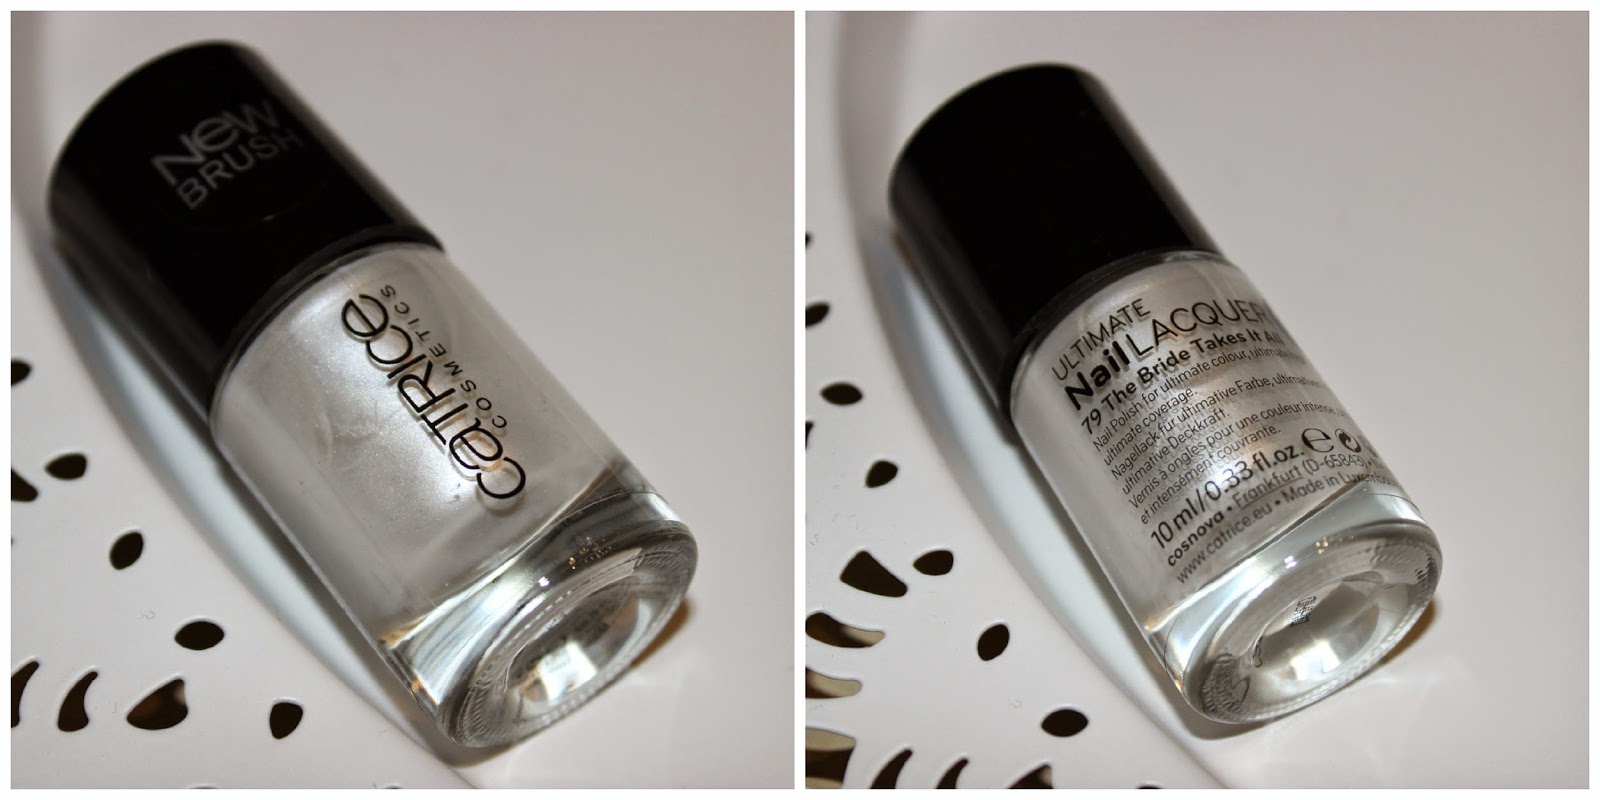 Lia Liebling: Catrice Ultra Stay & Gel Shine 3 Step System